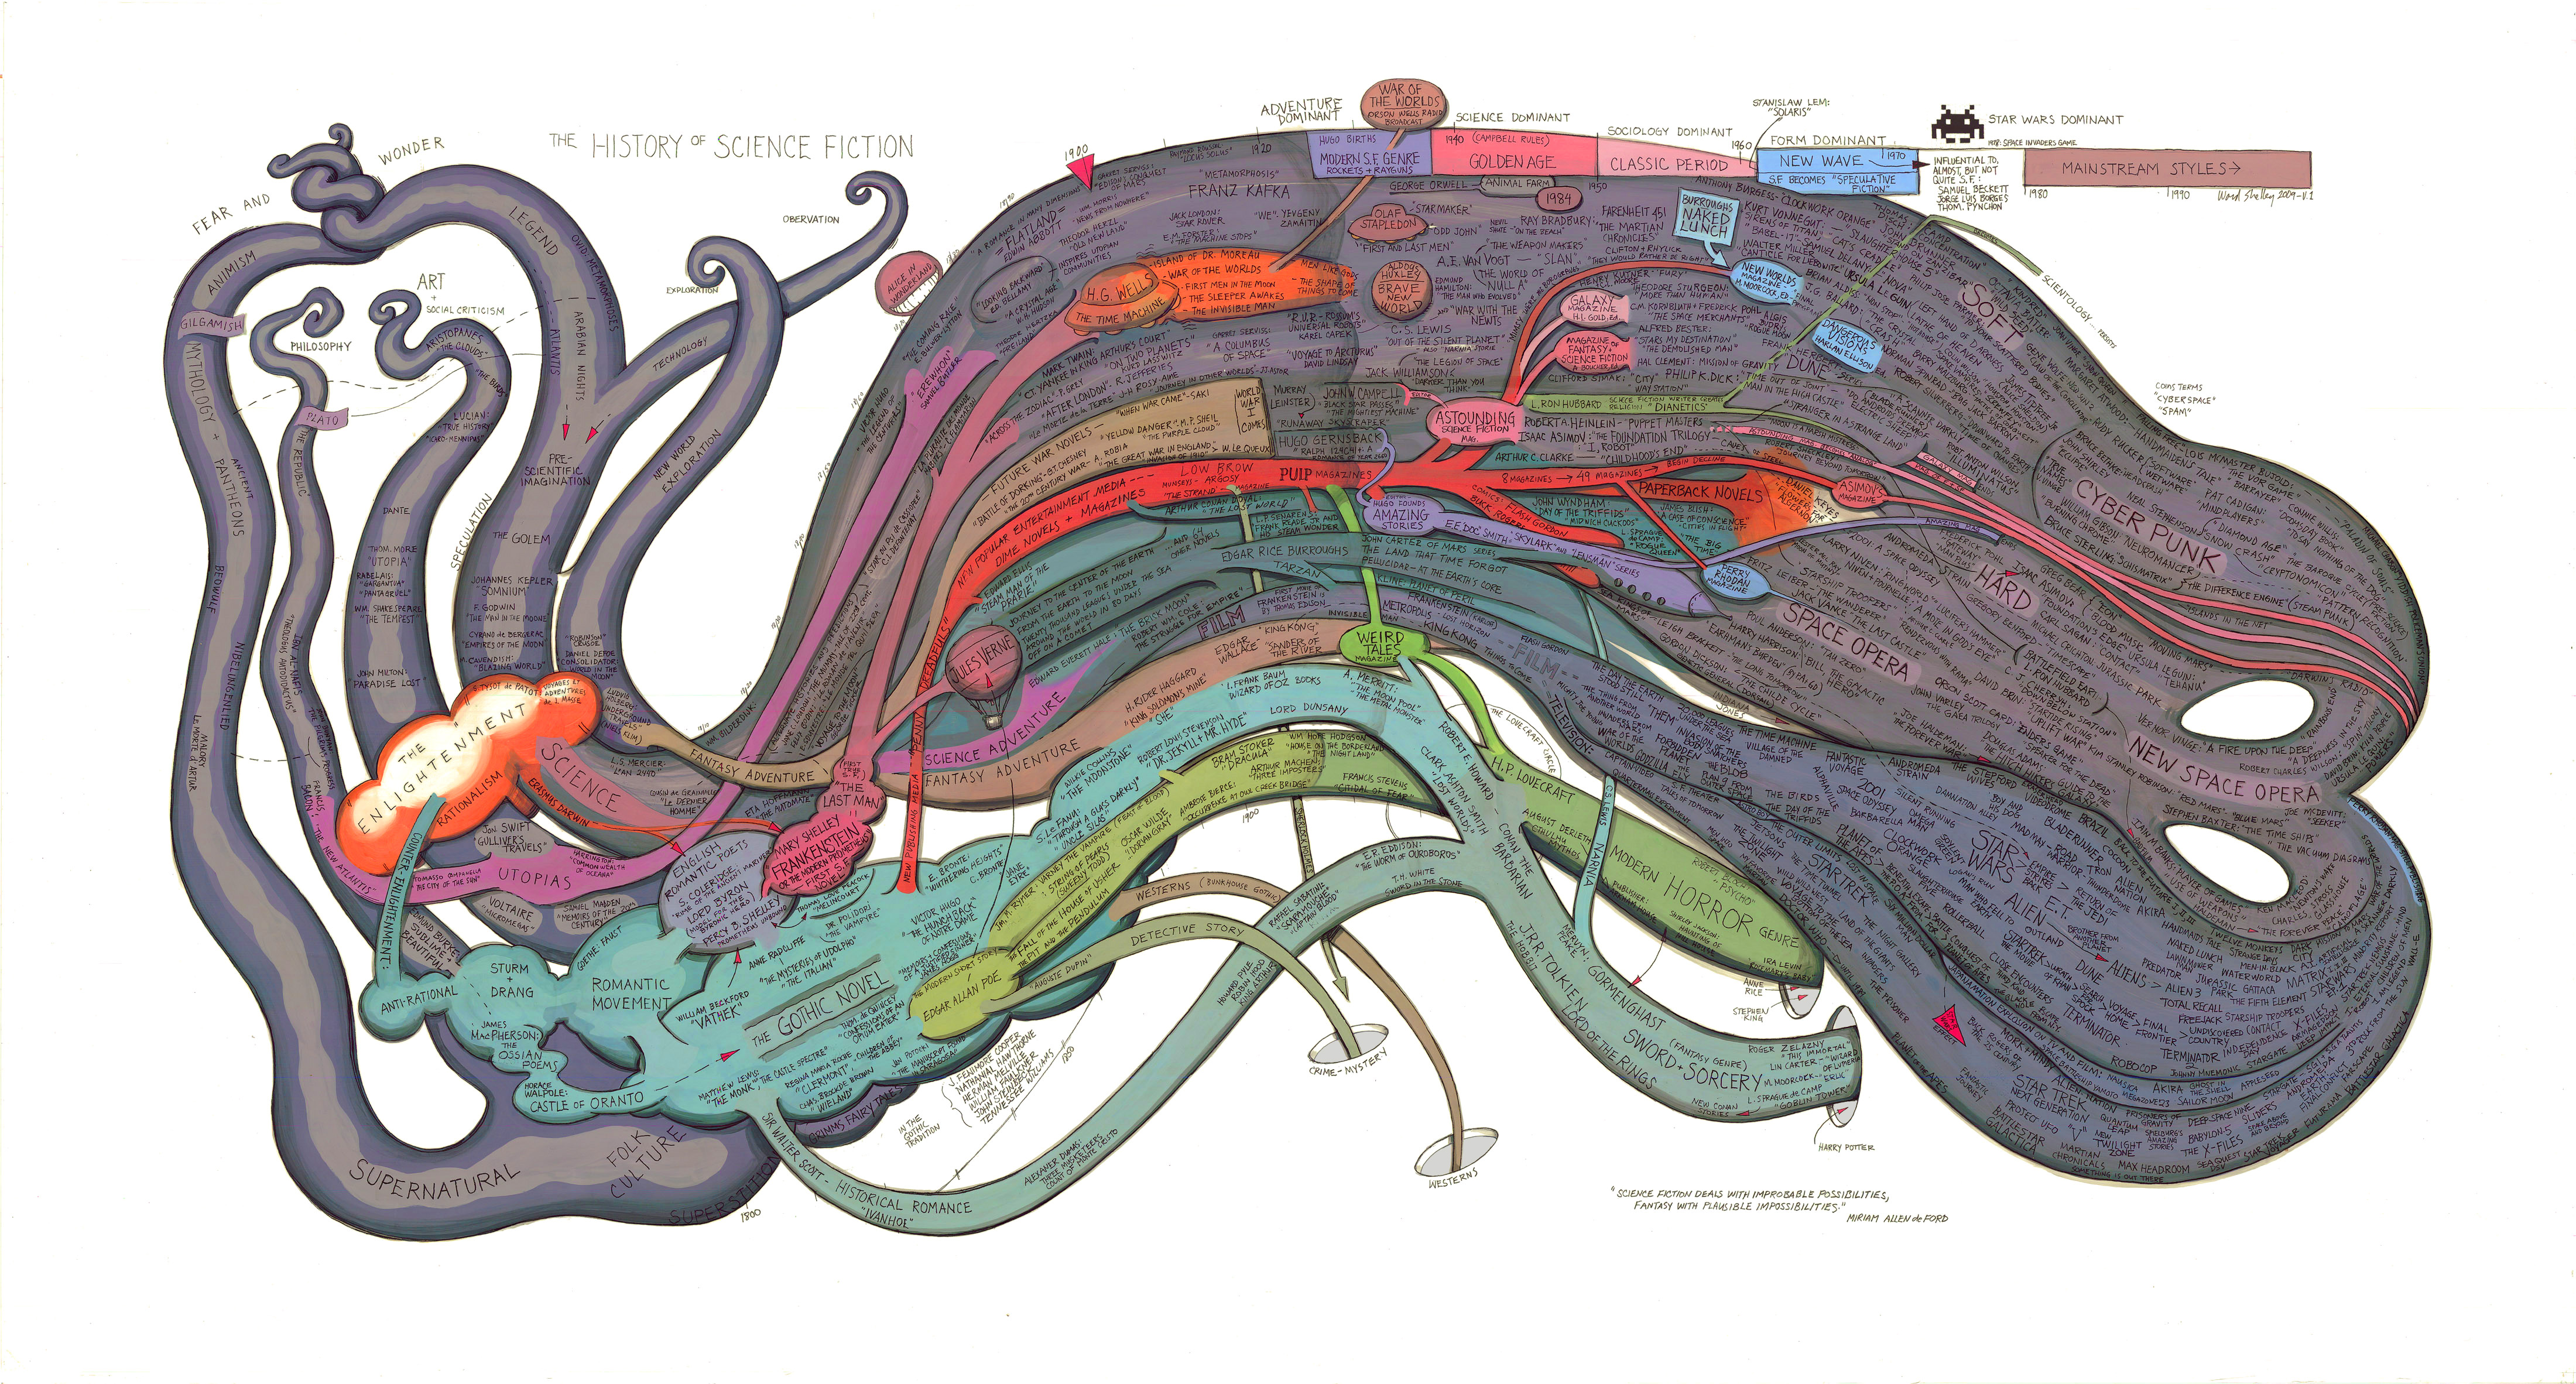 history-of-science-fiction-map.jpg